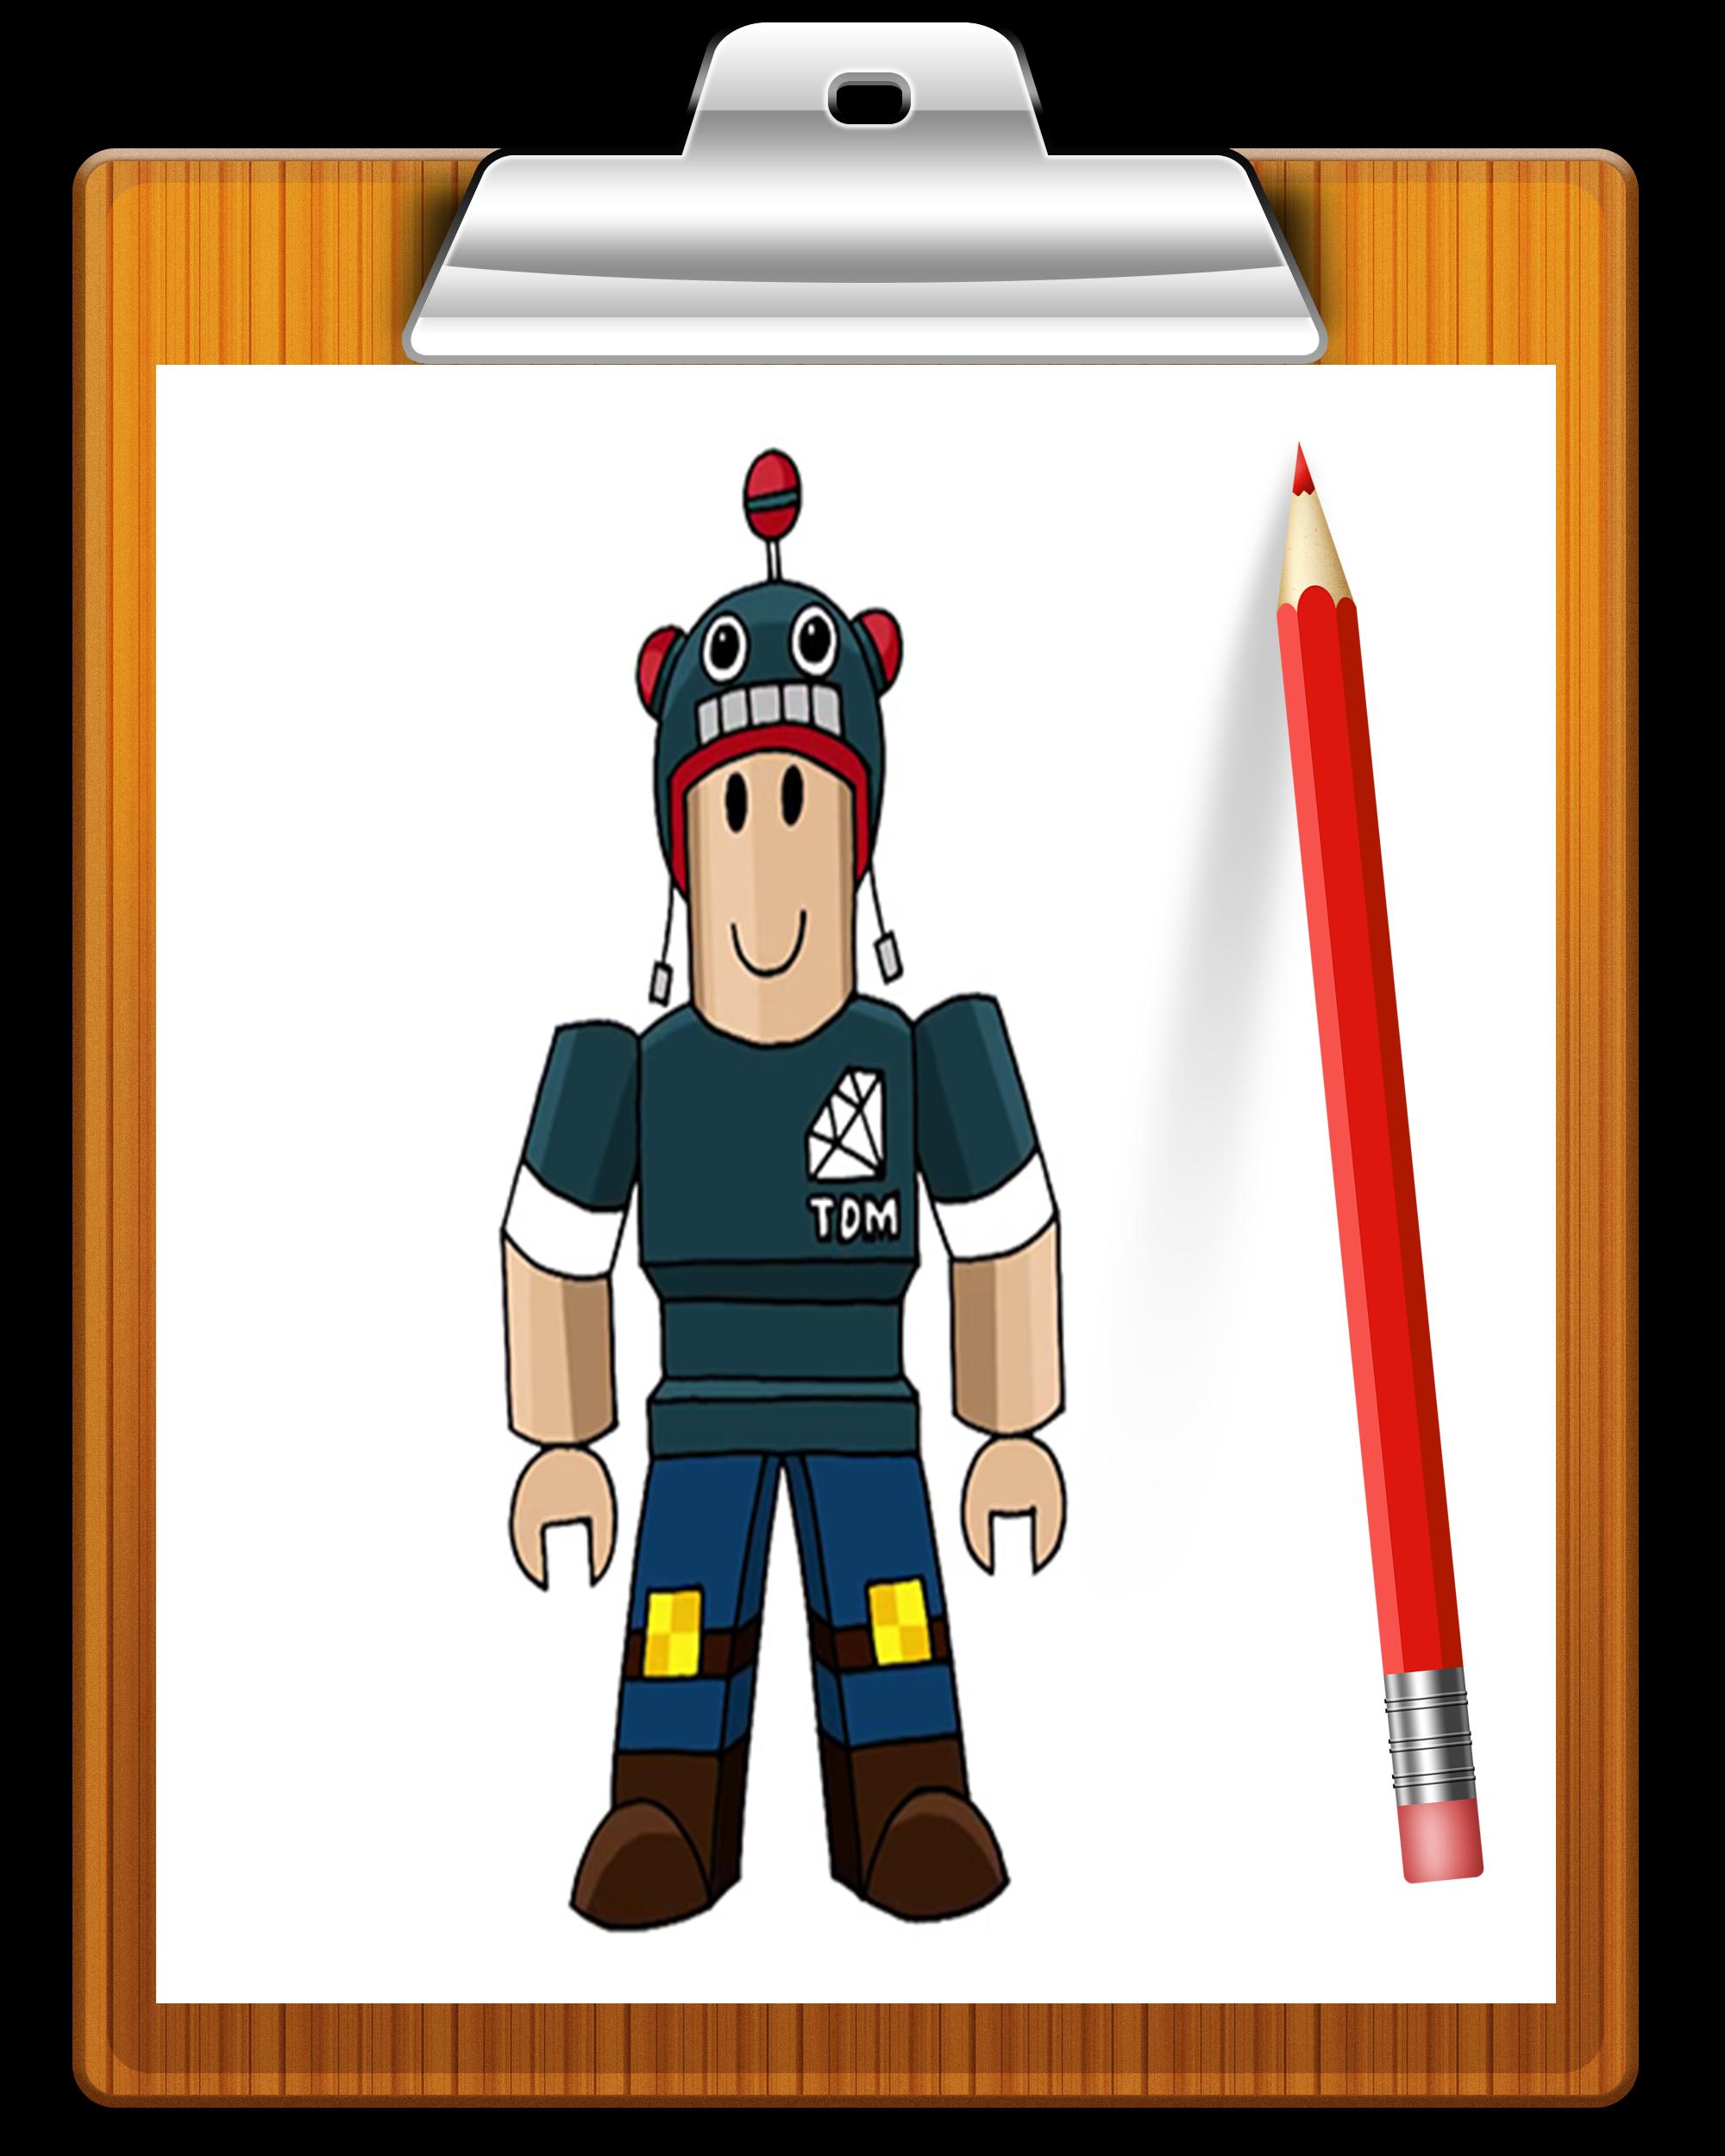 How To Draw Roblox For Android Apk Download - roblox download free apkpurecom